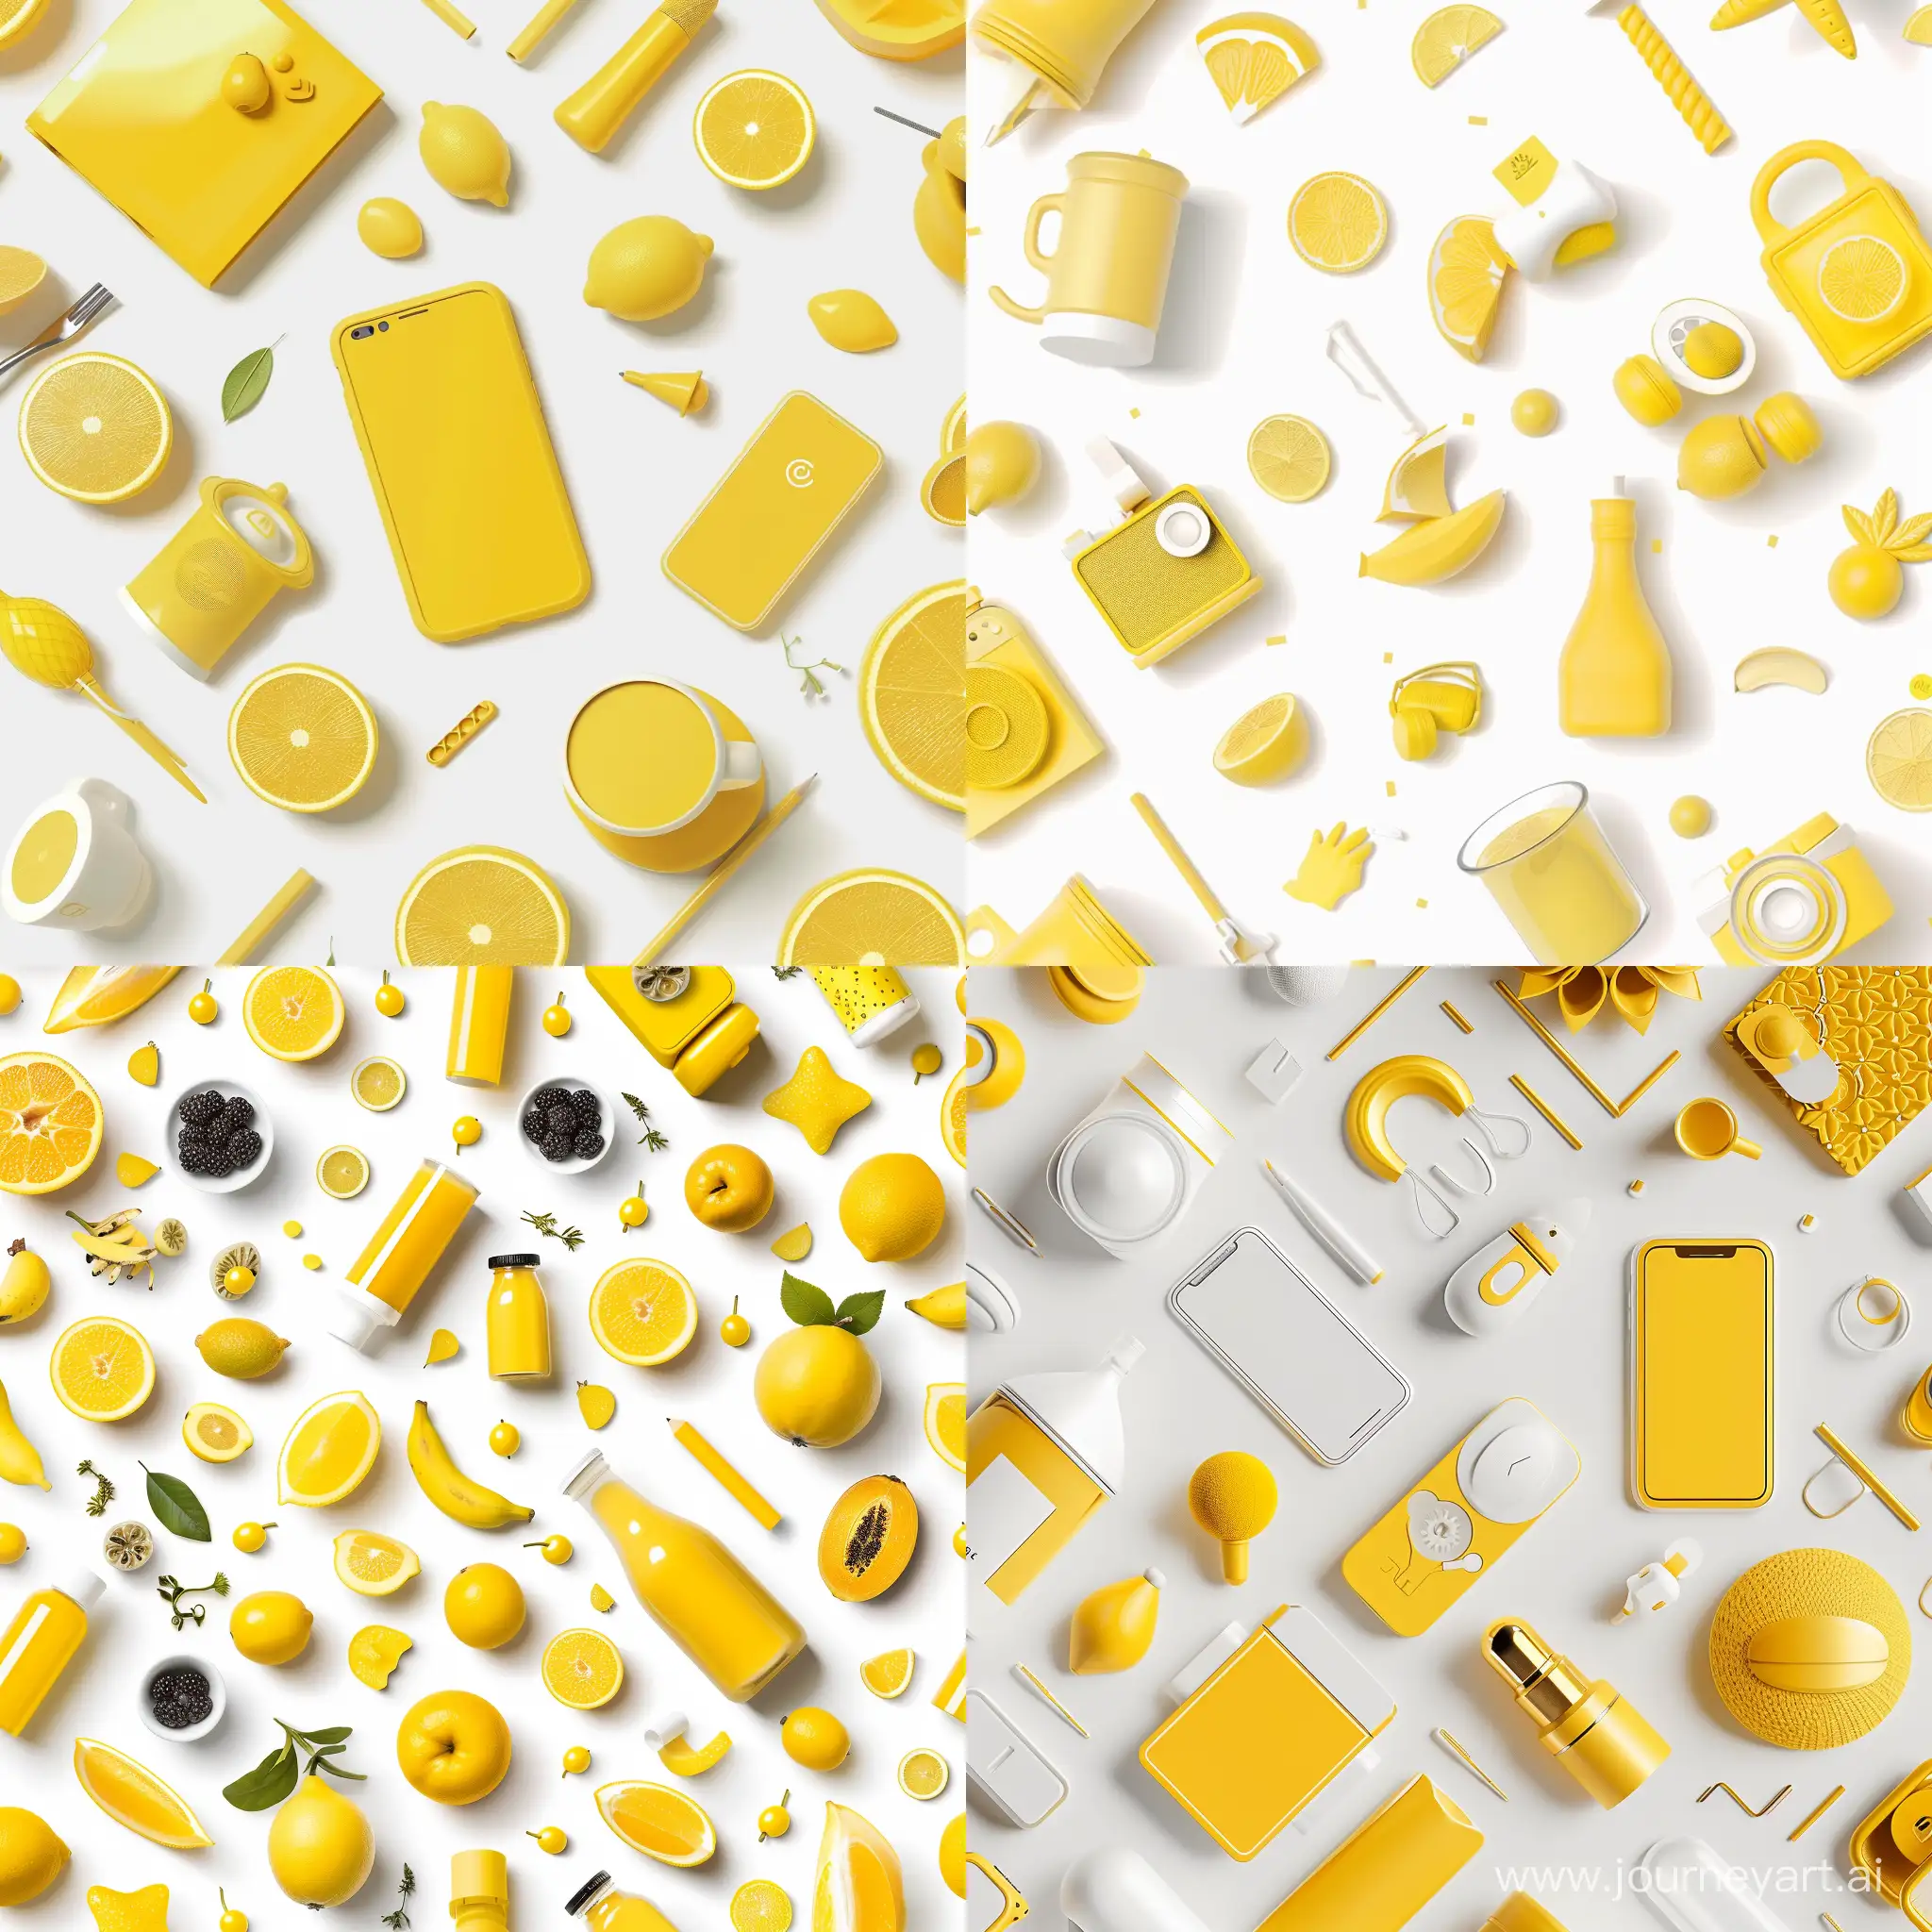 Bright-Yellow-Objects-on-Clean-White-Background-Vibrant-Telegram-Chat-Wallpaper